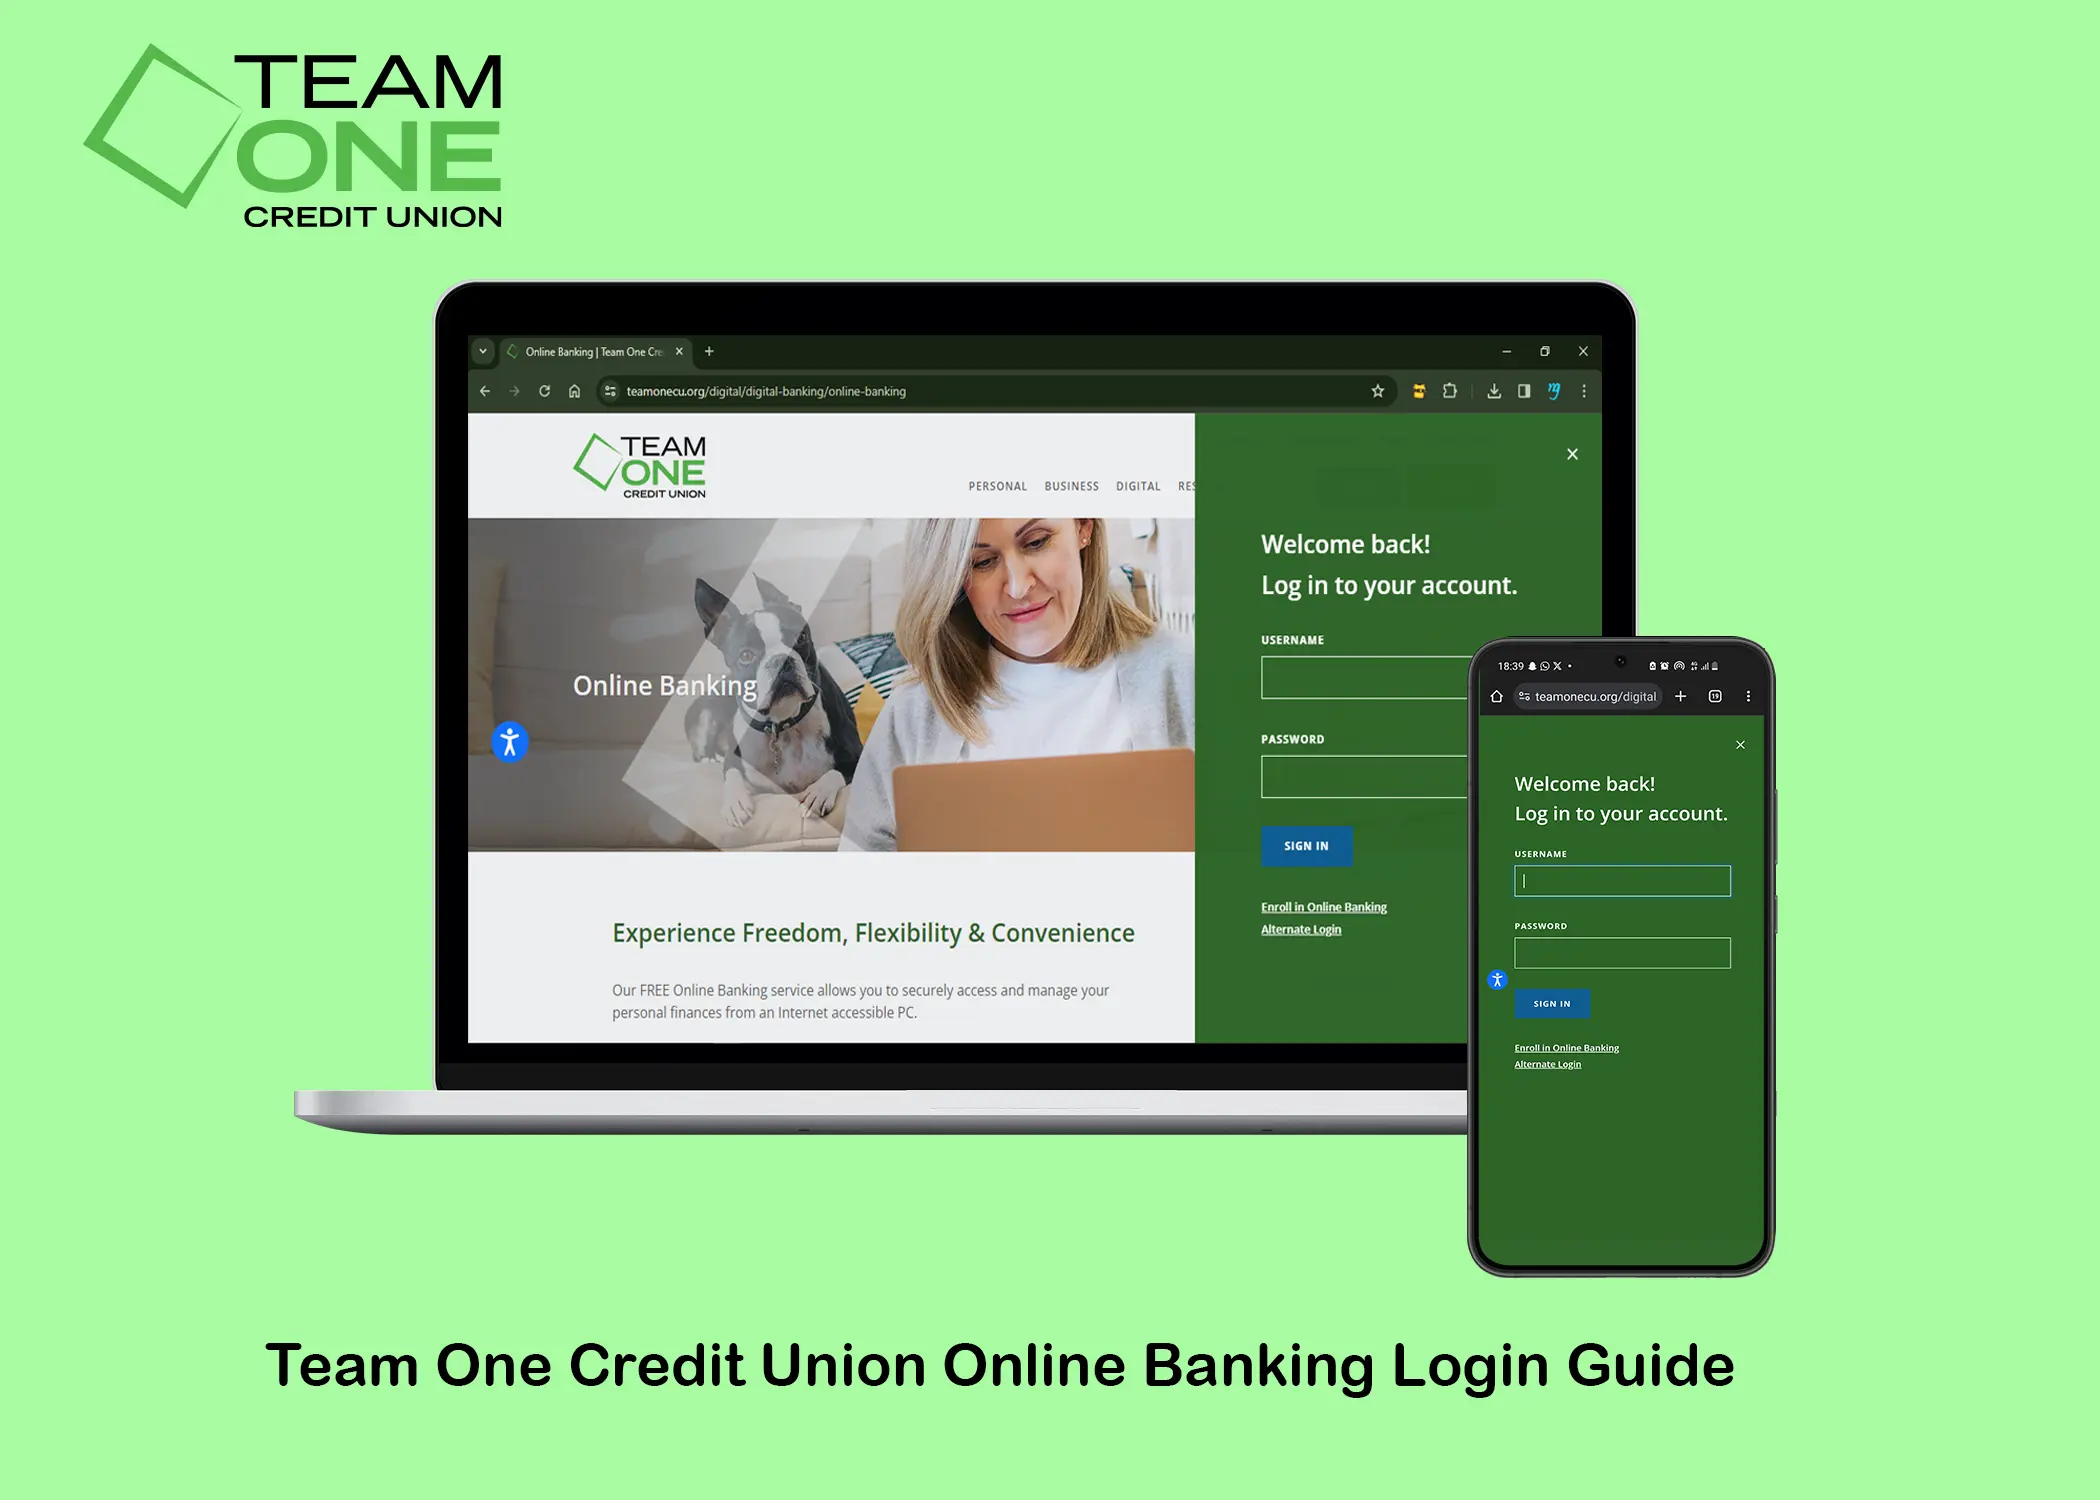 Team One Credit Union Online Banking Login Guide